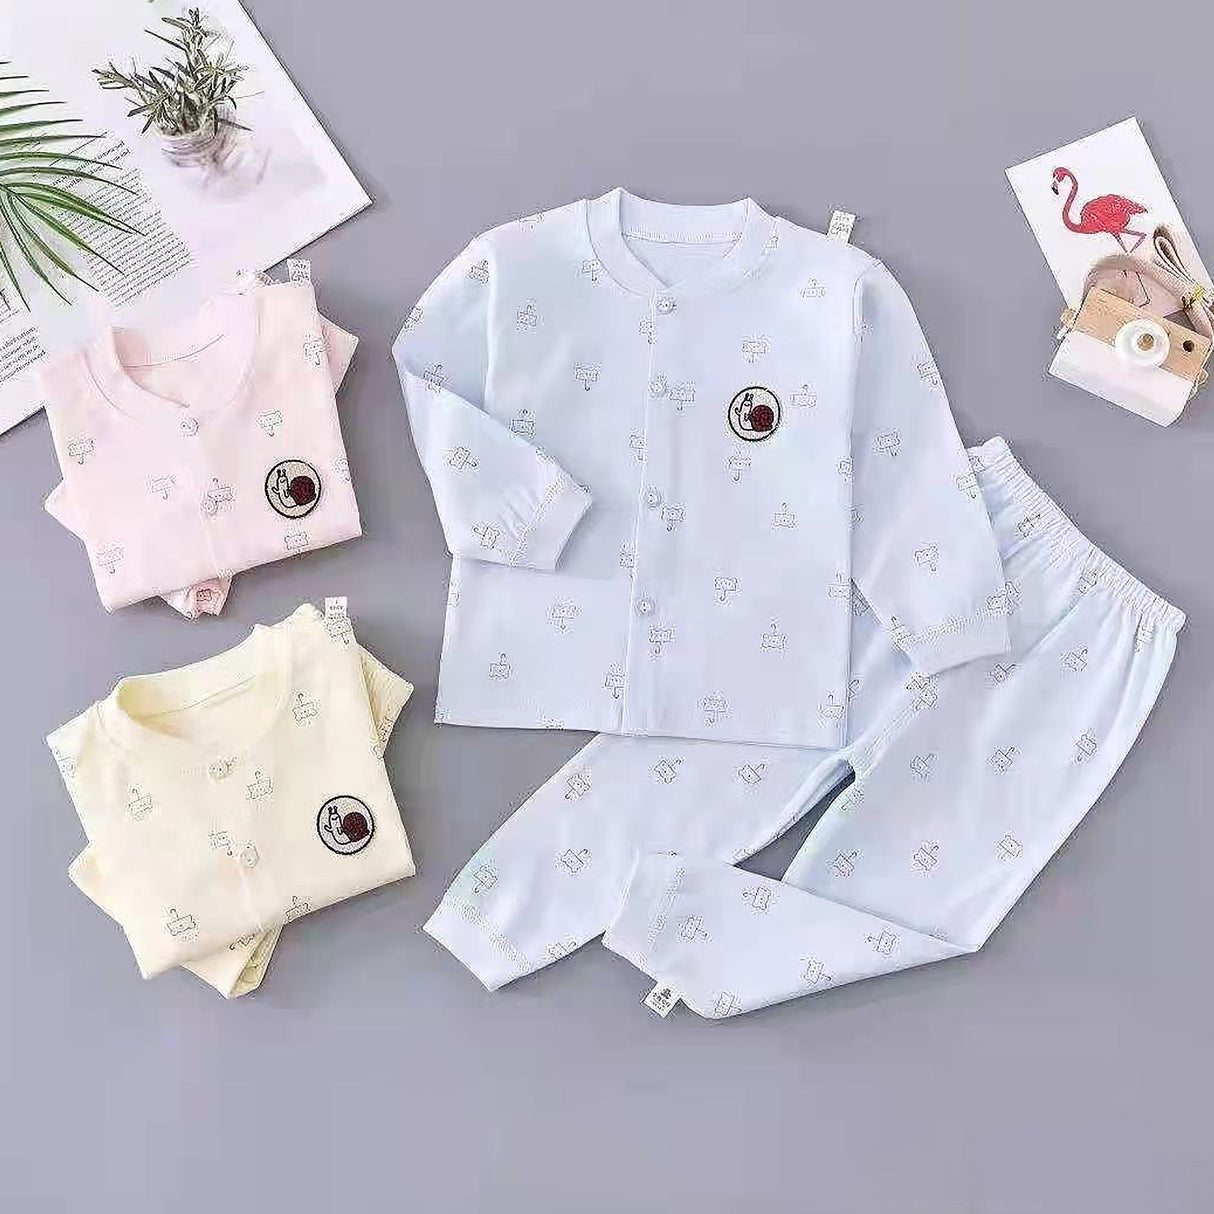 Smiling Snail Full Sleeves Top And Pyjama Buttoned Cotton Night Suit